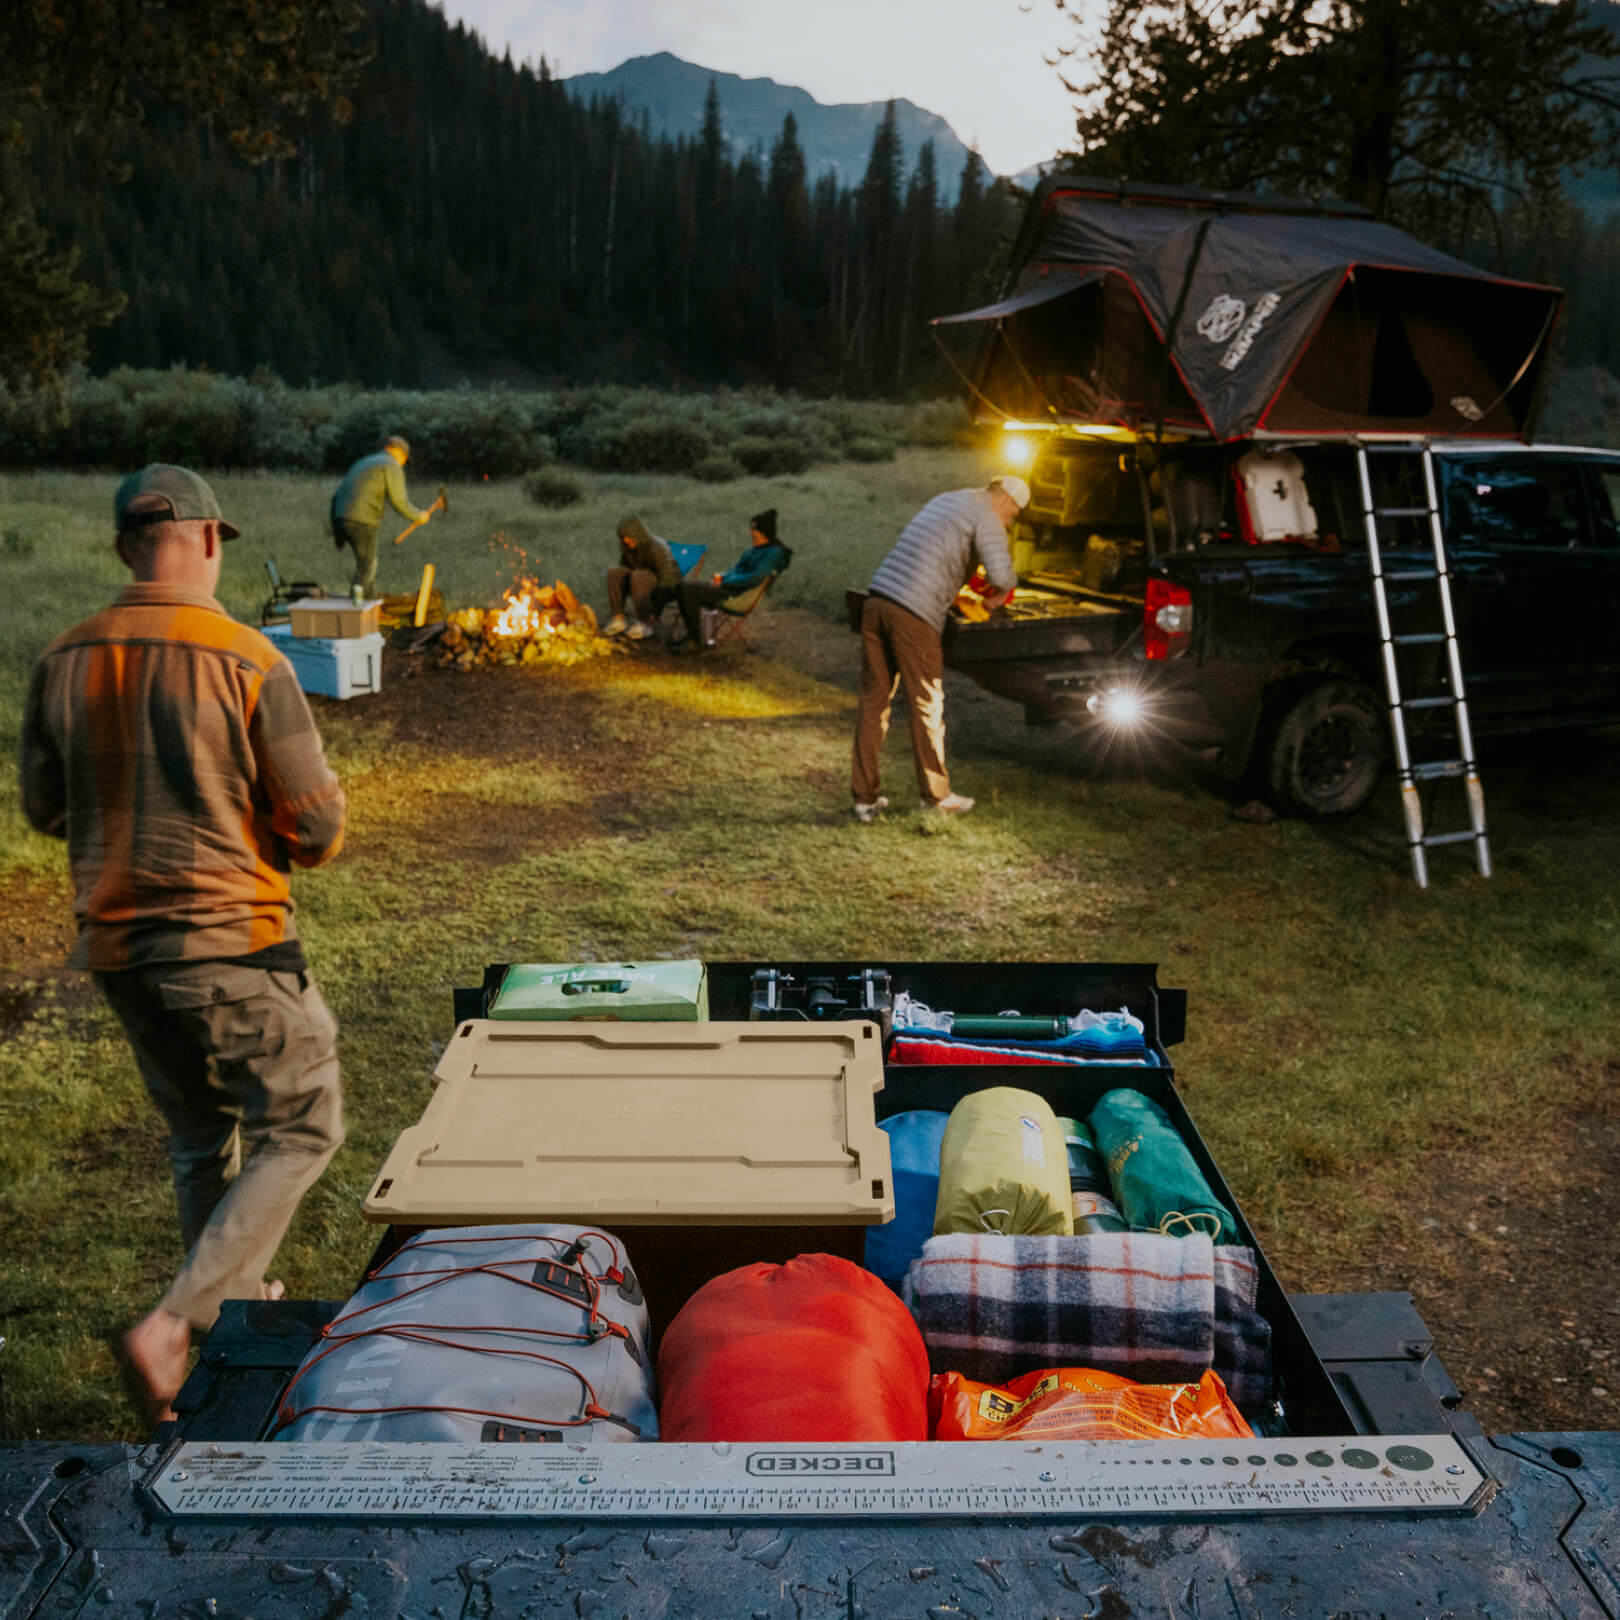 Midsize Drawer System being used as camping storage while camping in the mountains